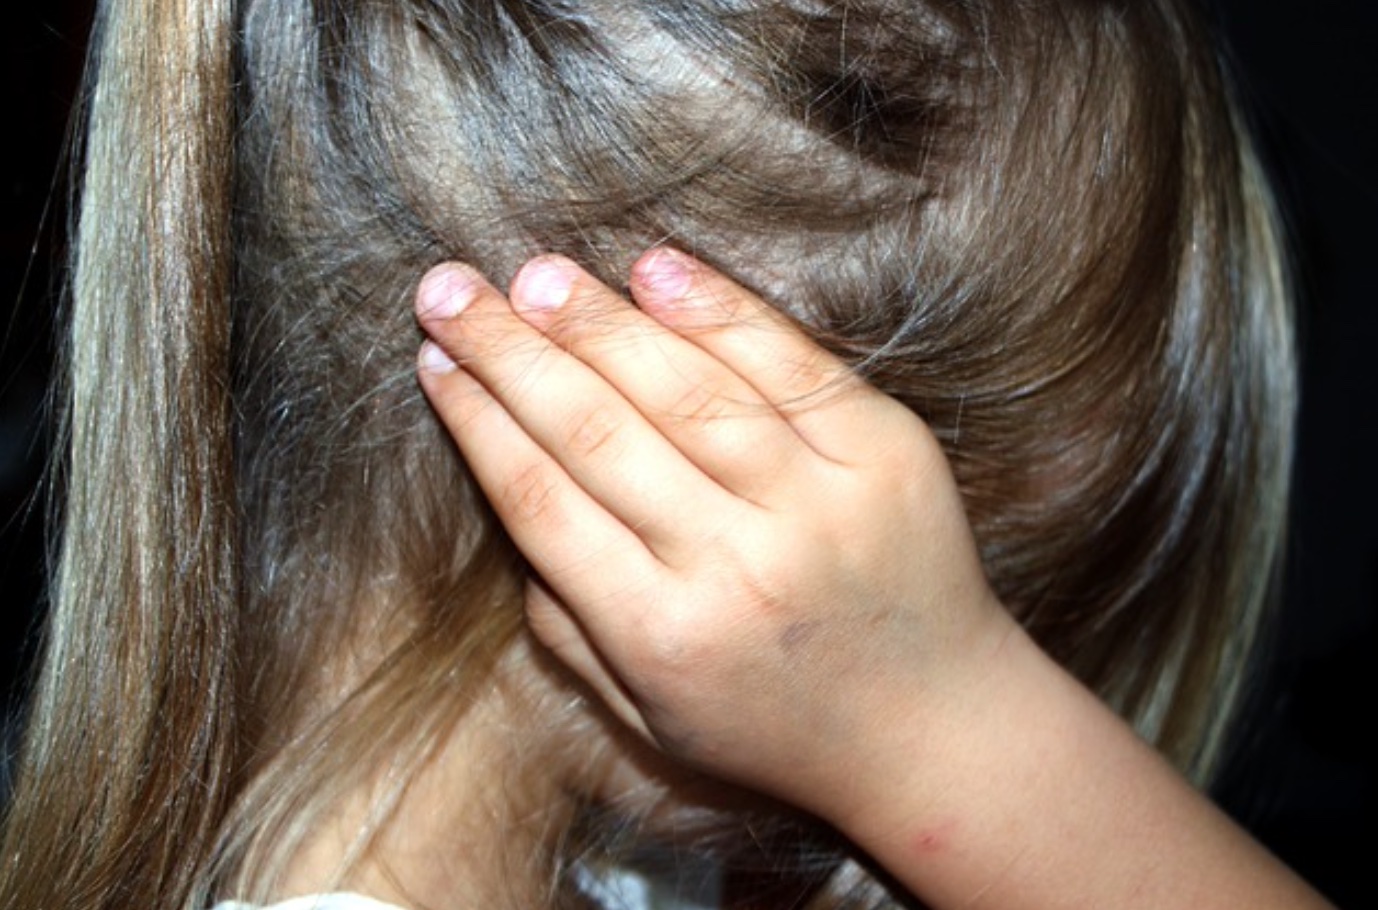 Scared little girl with hands over her ears; image by Counselling, via Pixabay.com.